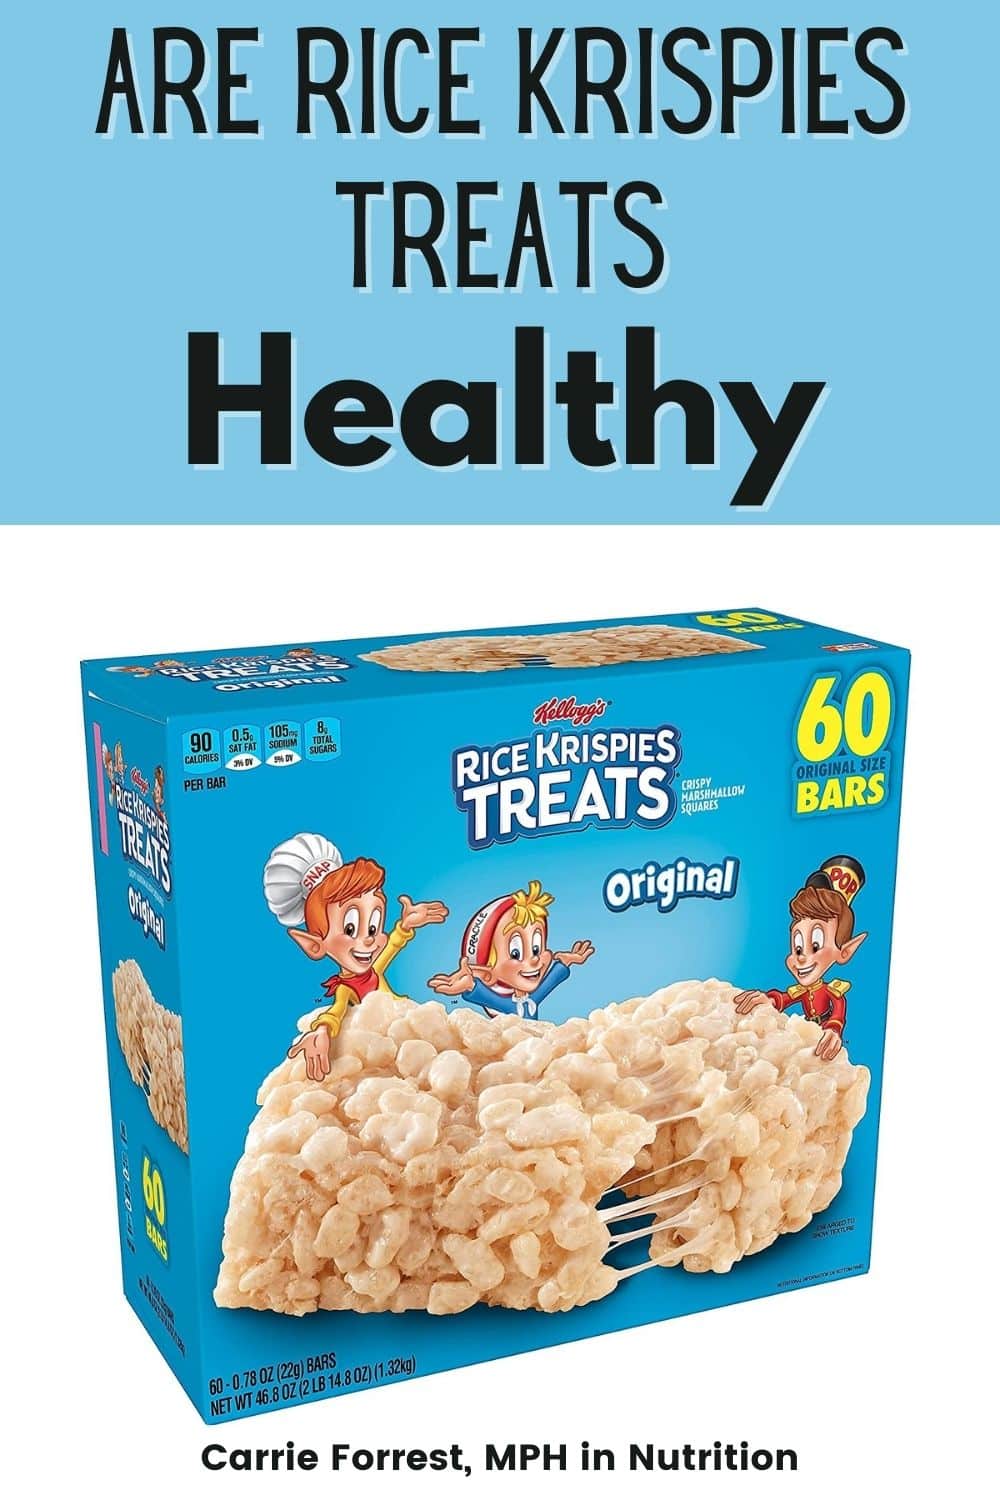 Are Packaged Rice Krispie Treats Healthy (Nutrition Pros and Cons)?